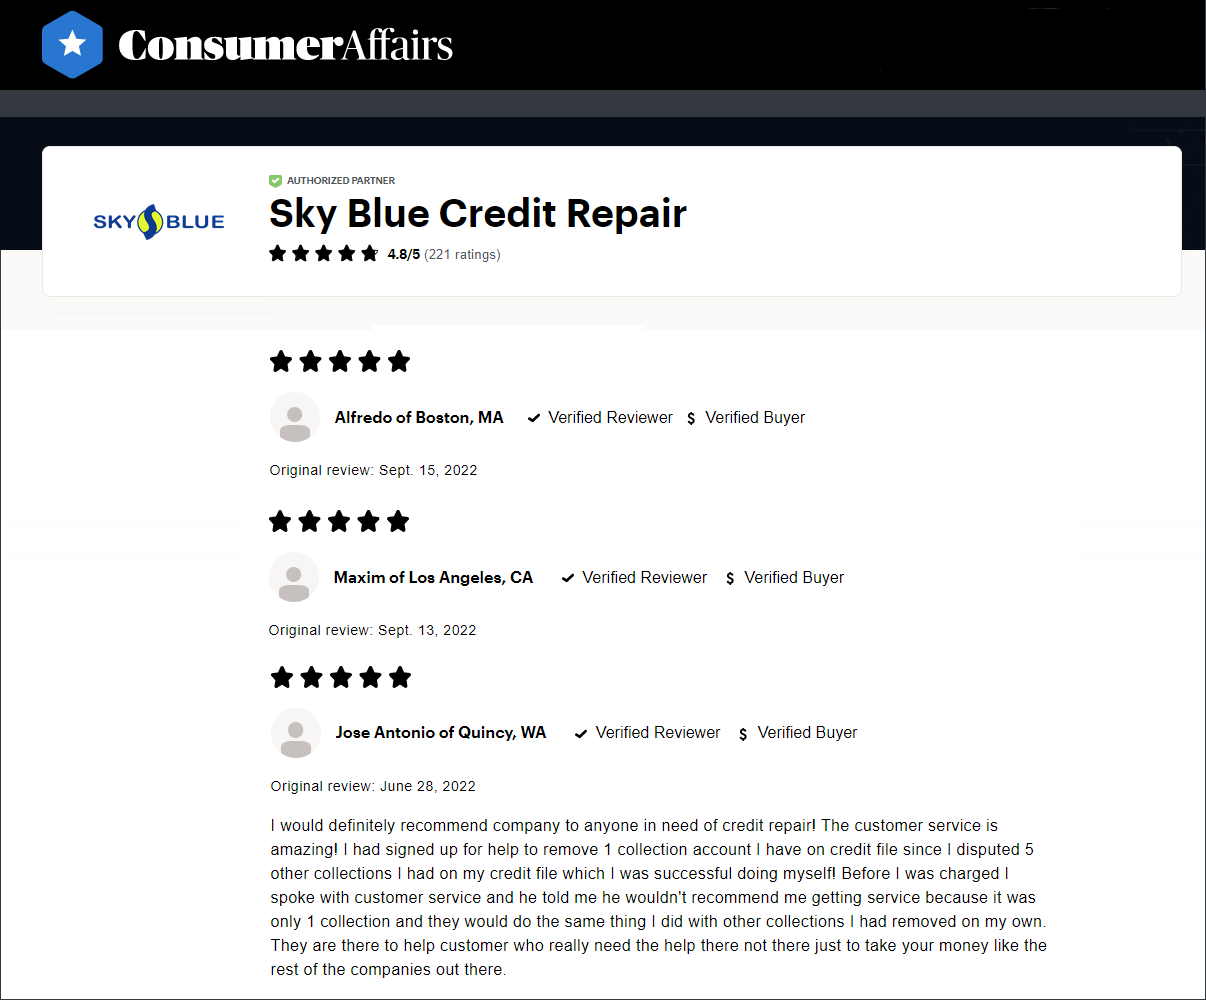 The popular review site Consumer Affairs gives Sky Blue Credit Repair a solid 4.8 out of 5 stars as far as trust and getting the job done or consumers.